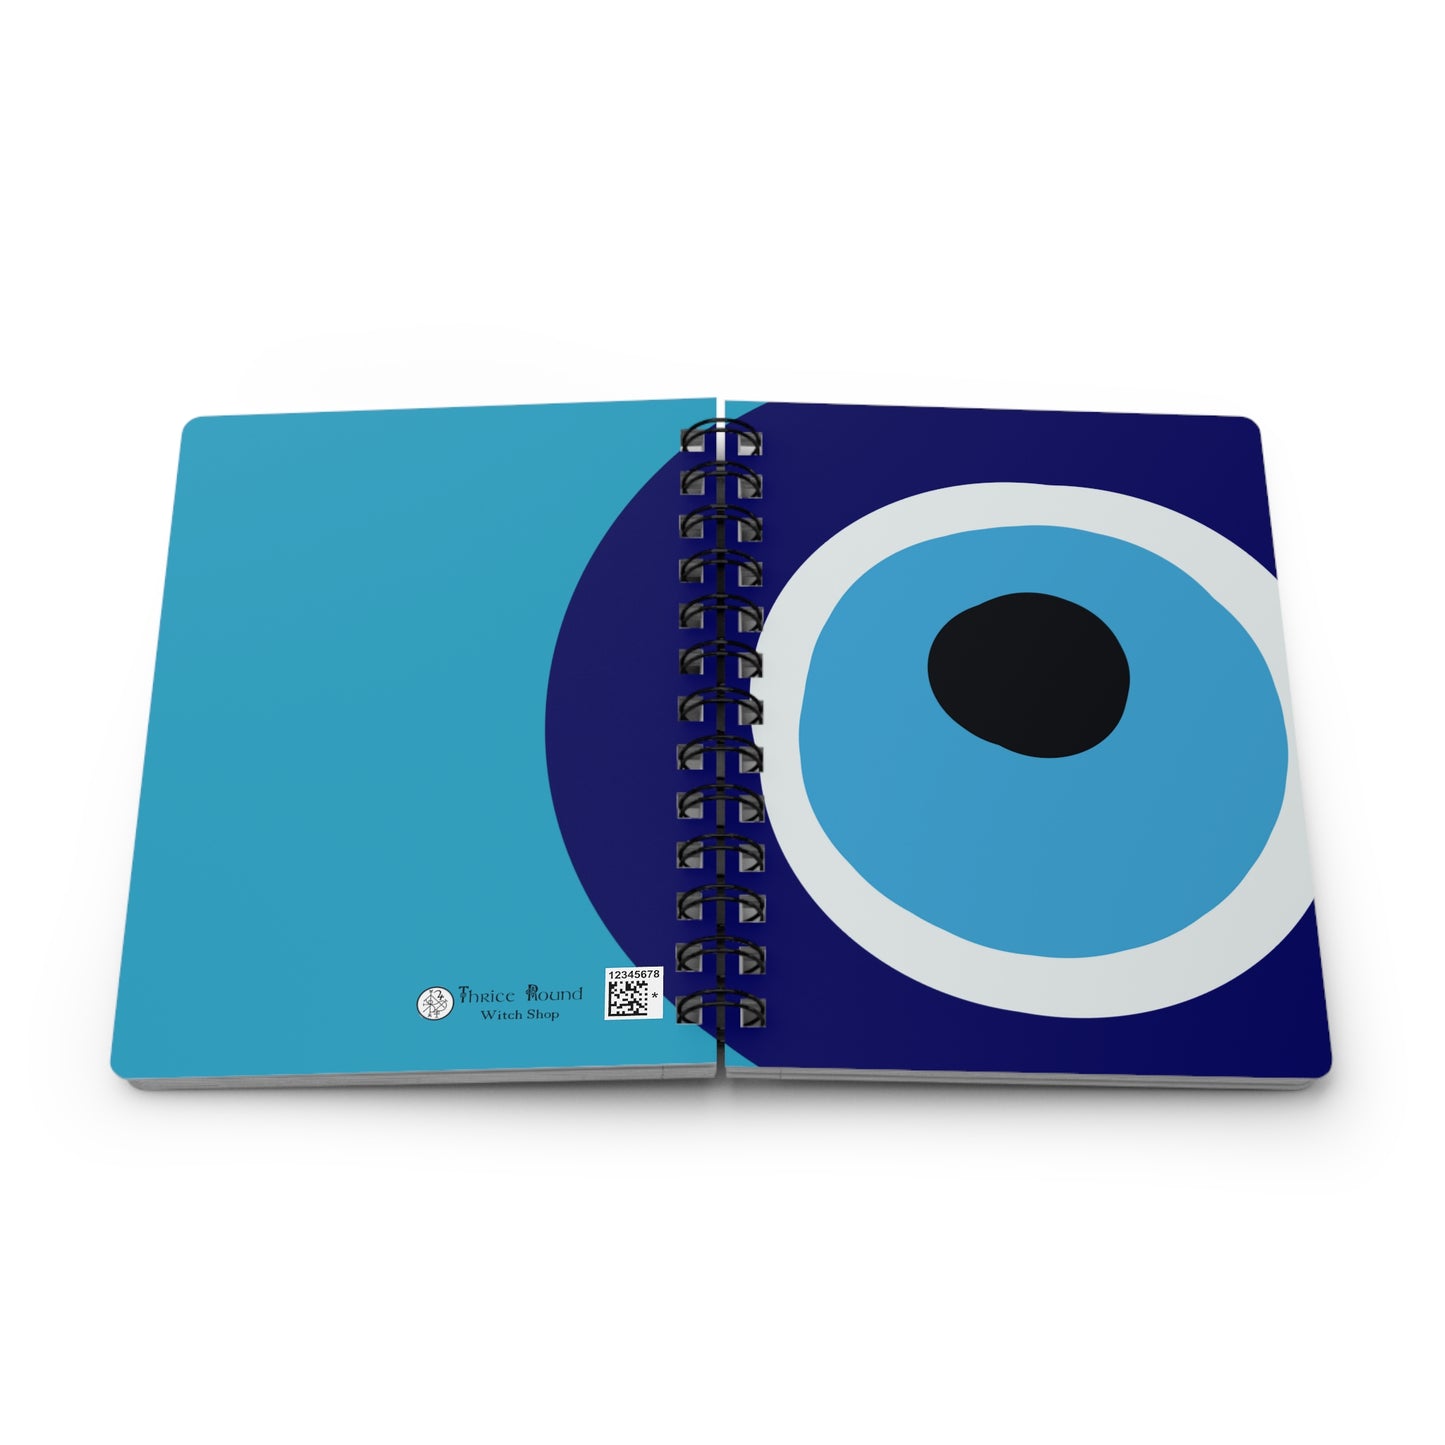 Evil Eye Spiral Bound Notebook | Lined Pages | Grimoire | Book of Shadows